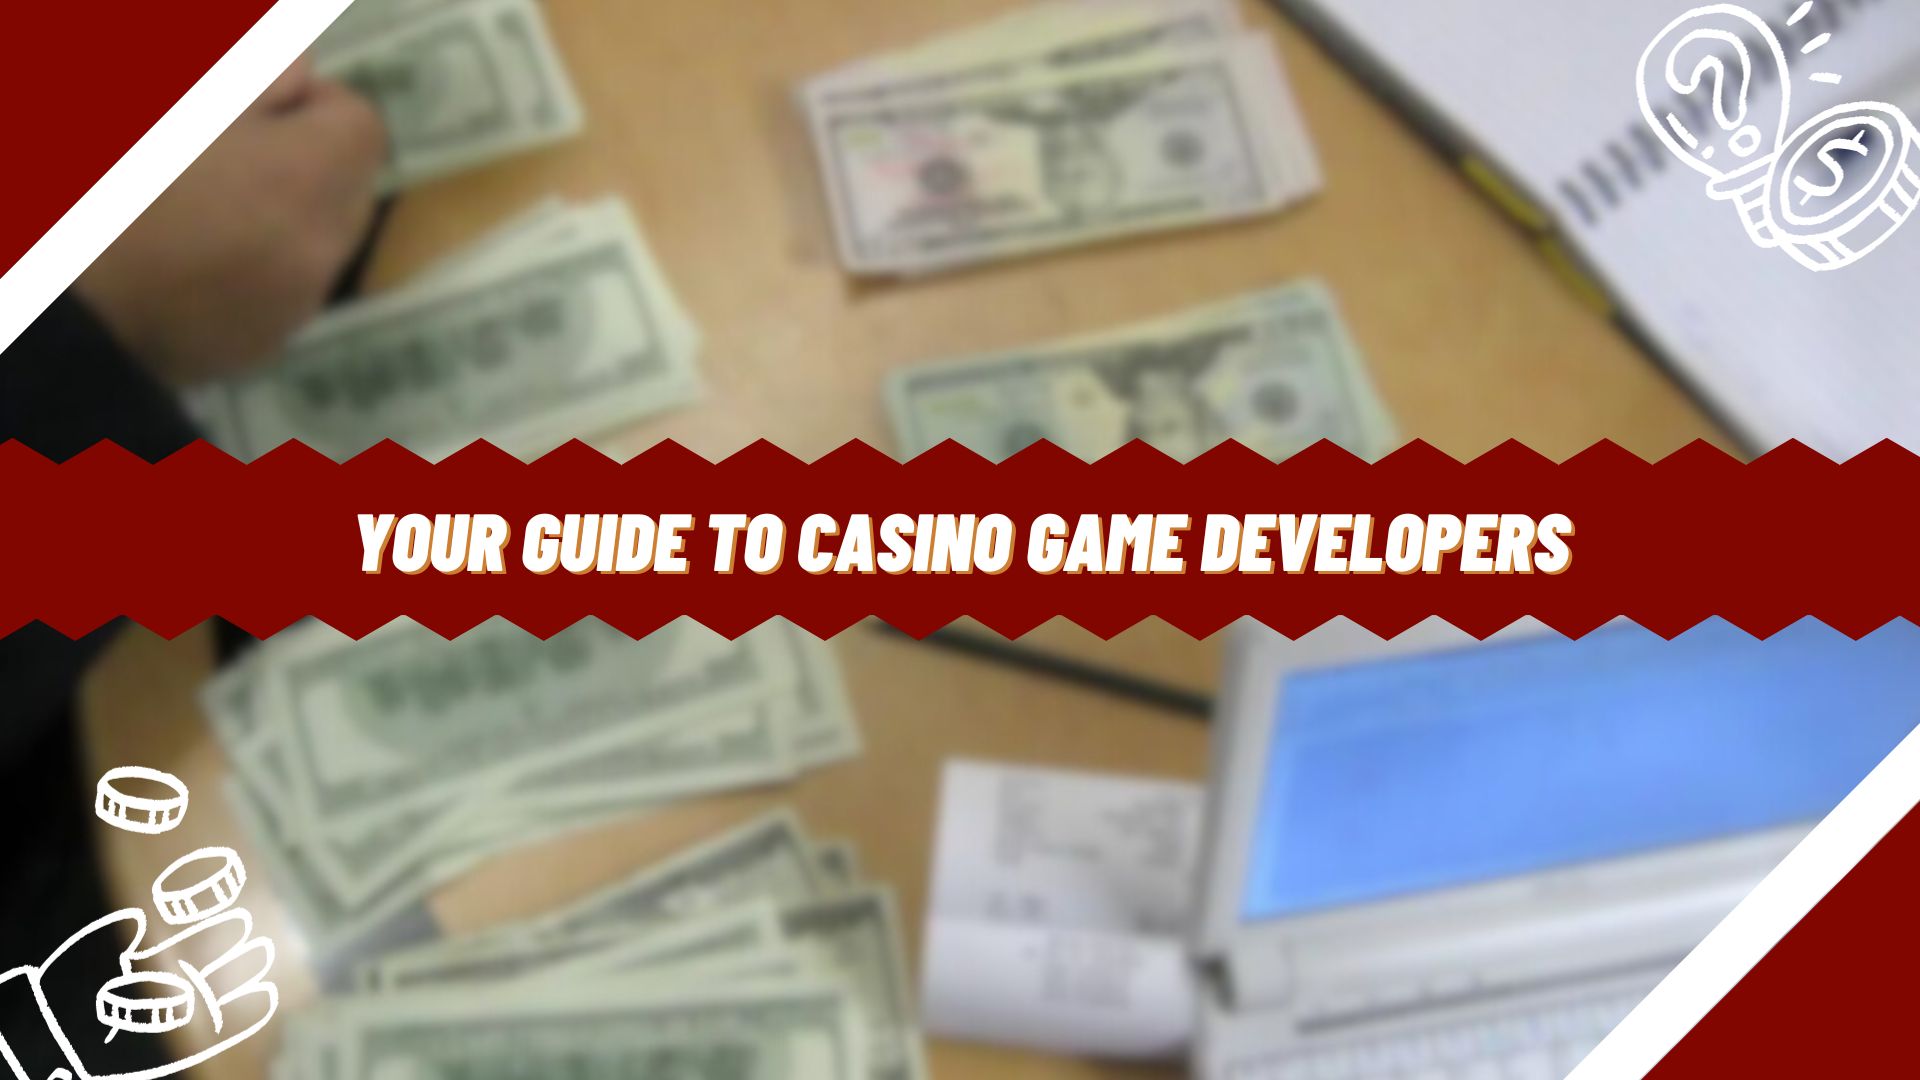 Your Guide to Casino Game Developers